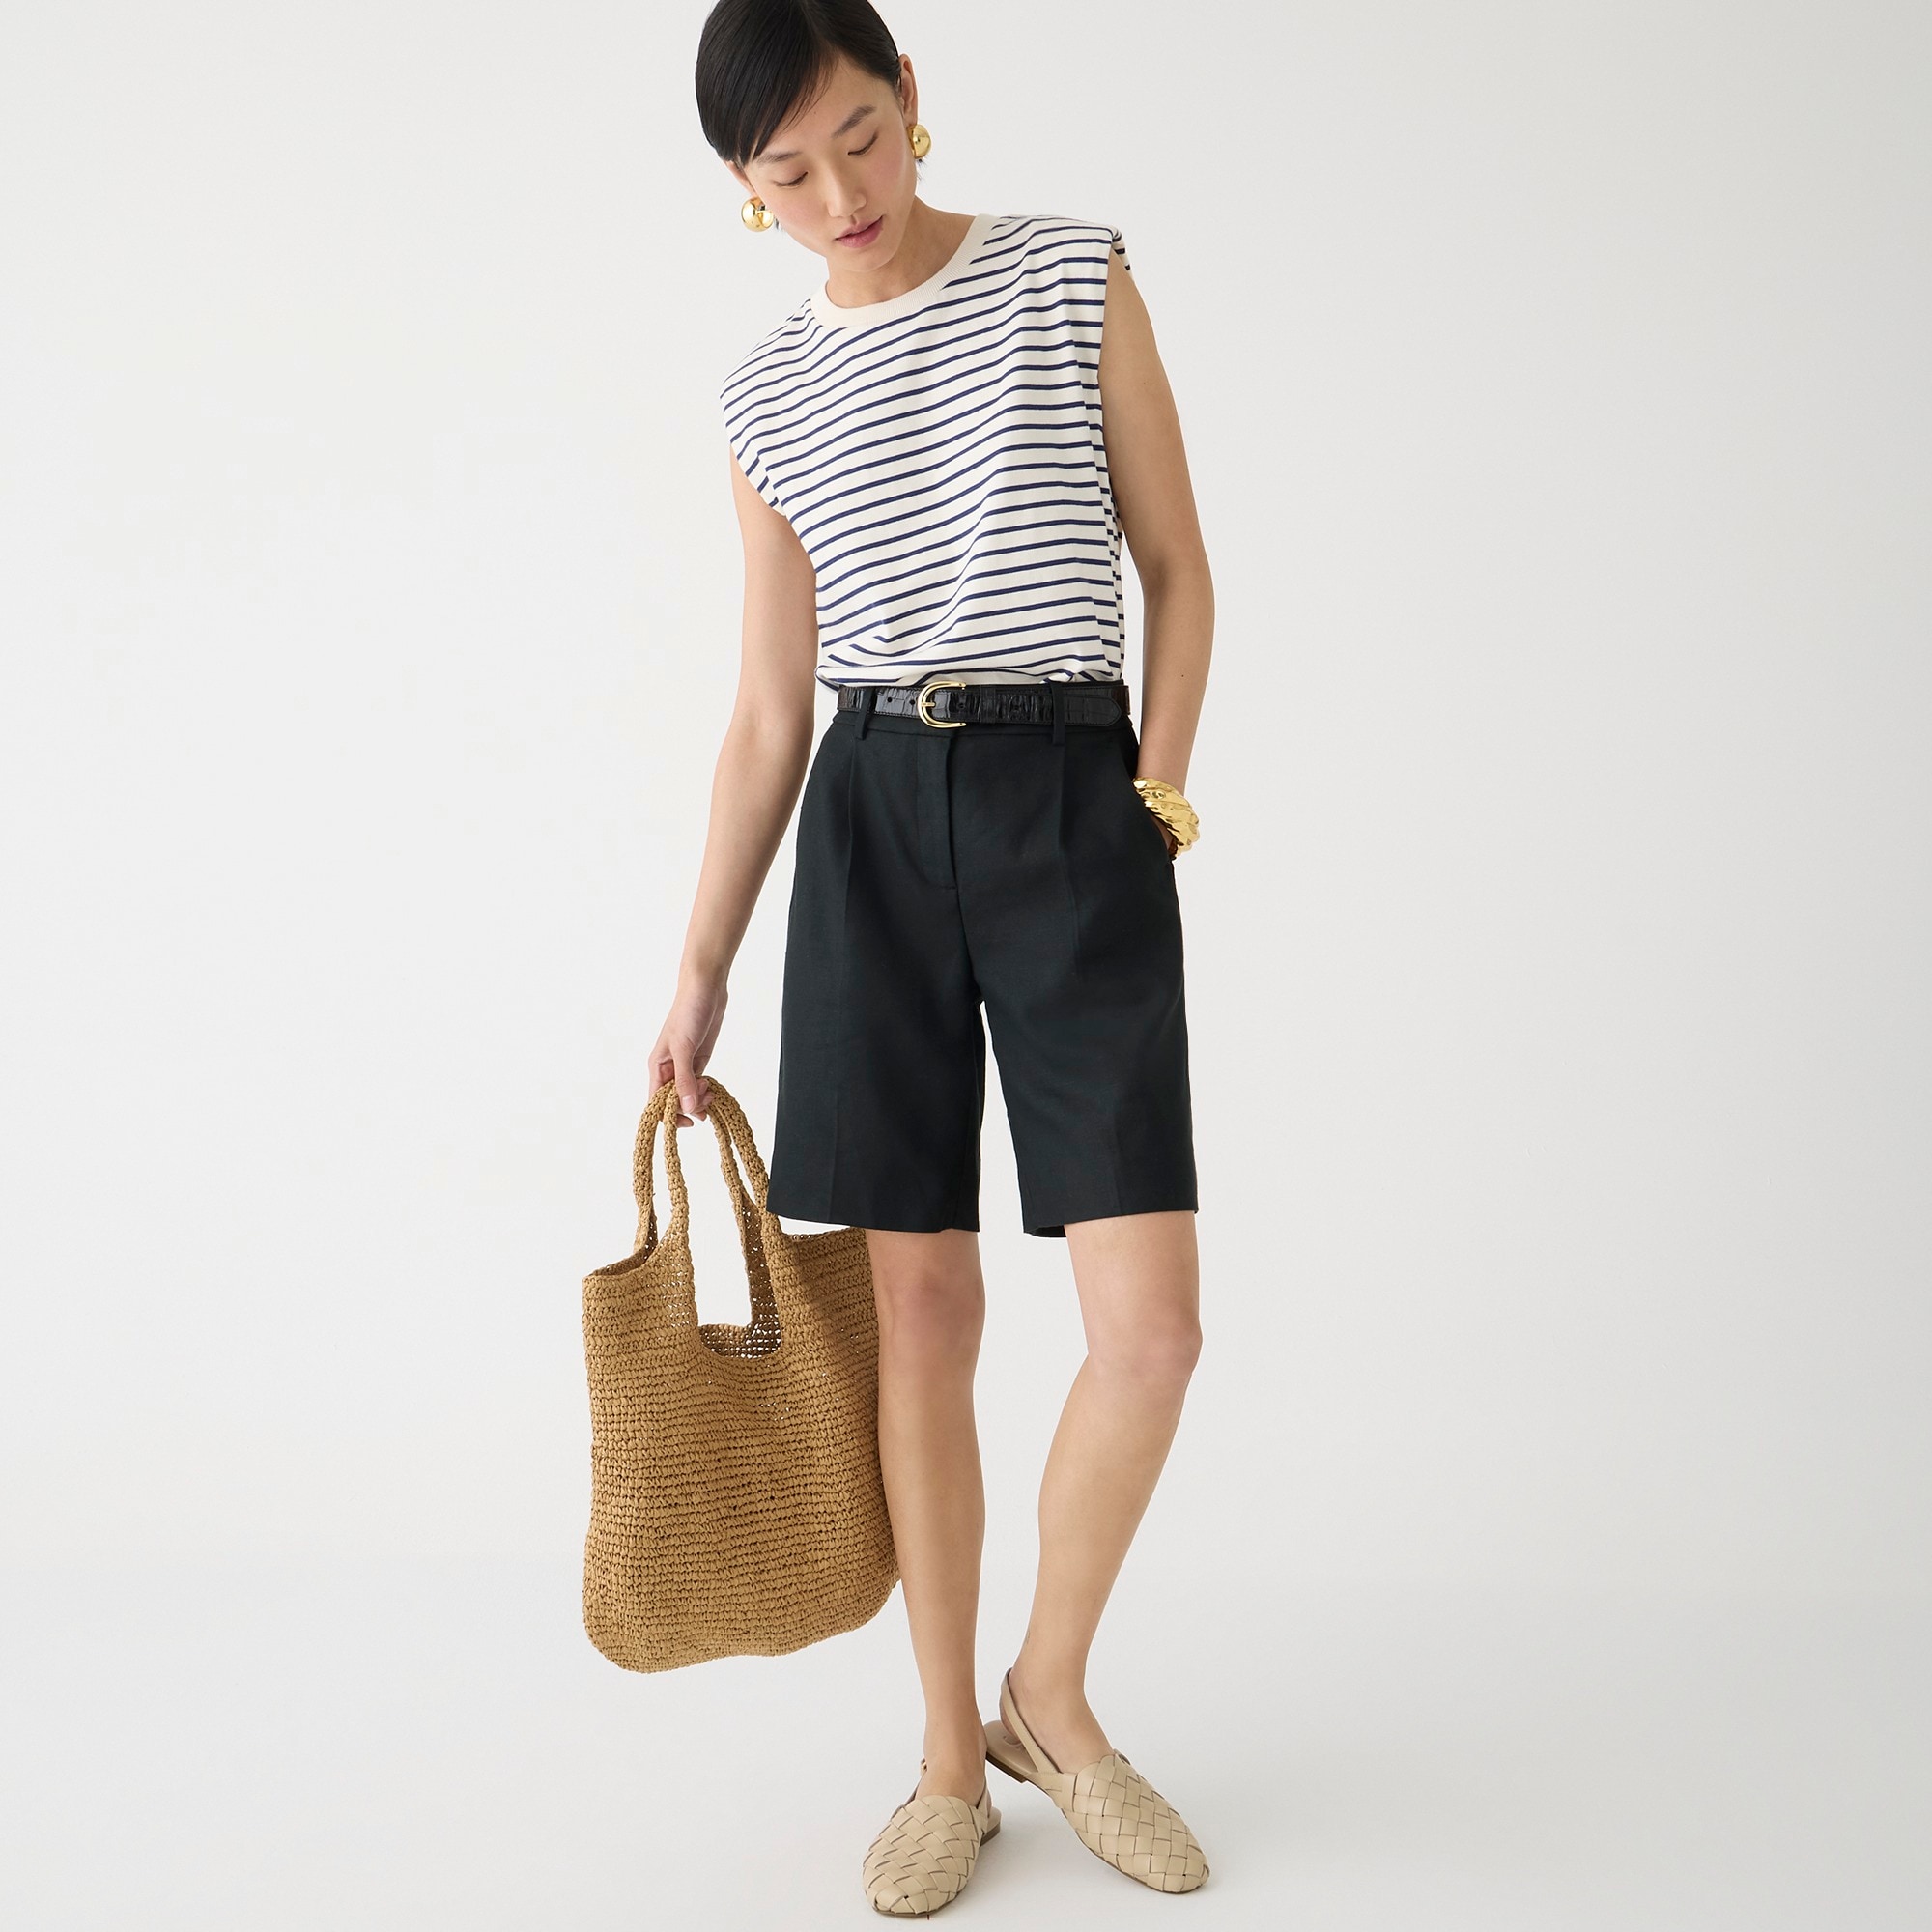  Structured muscle T-shirt in stripe mariner cotton